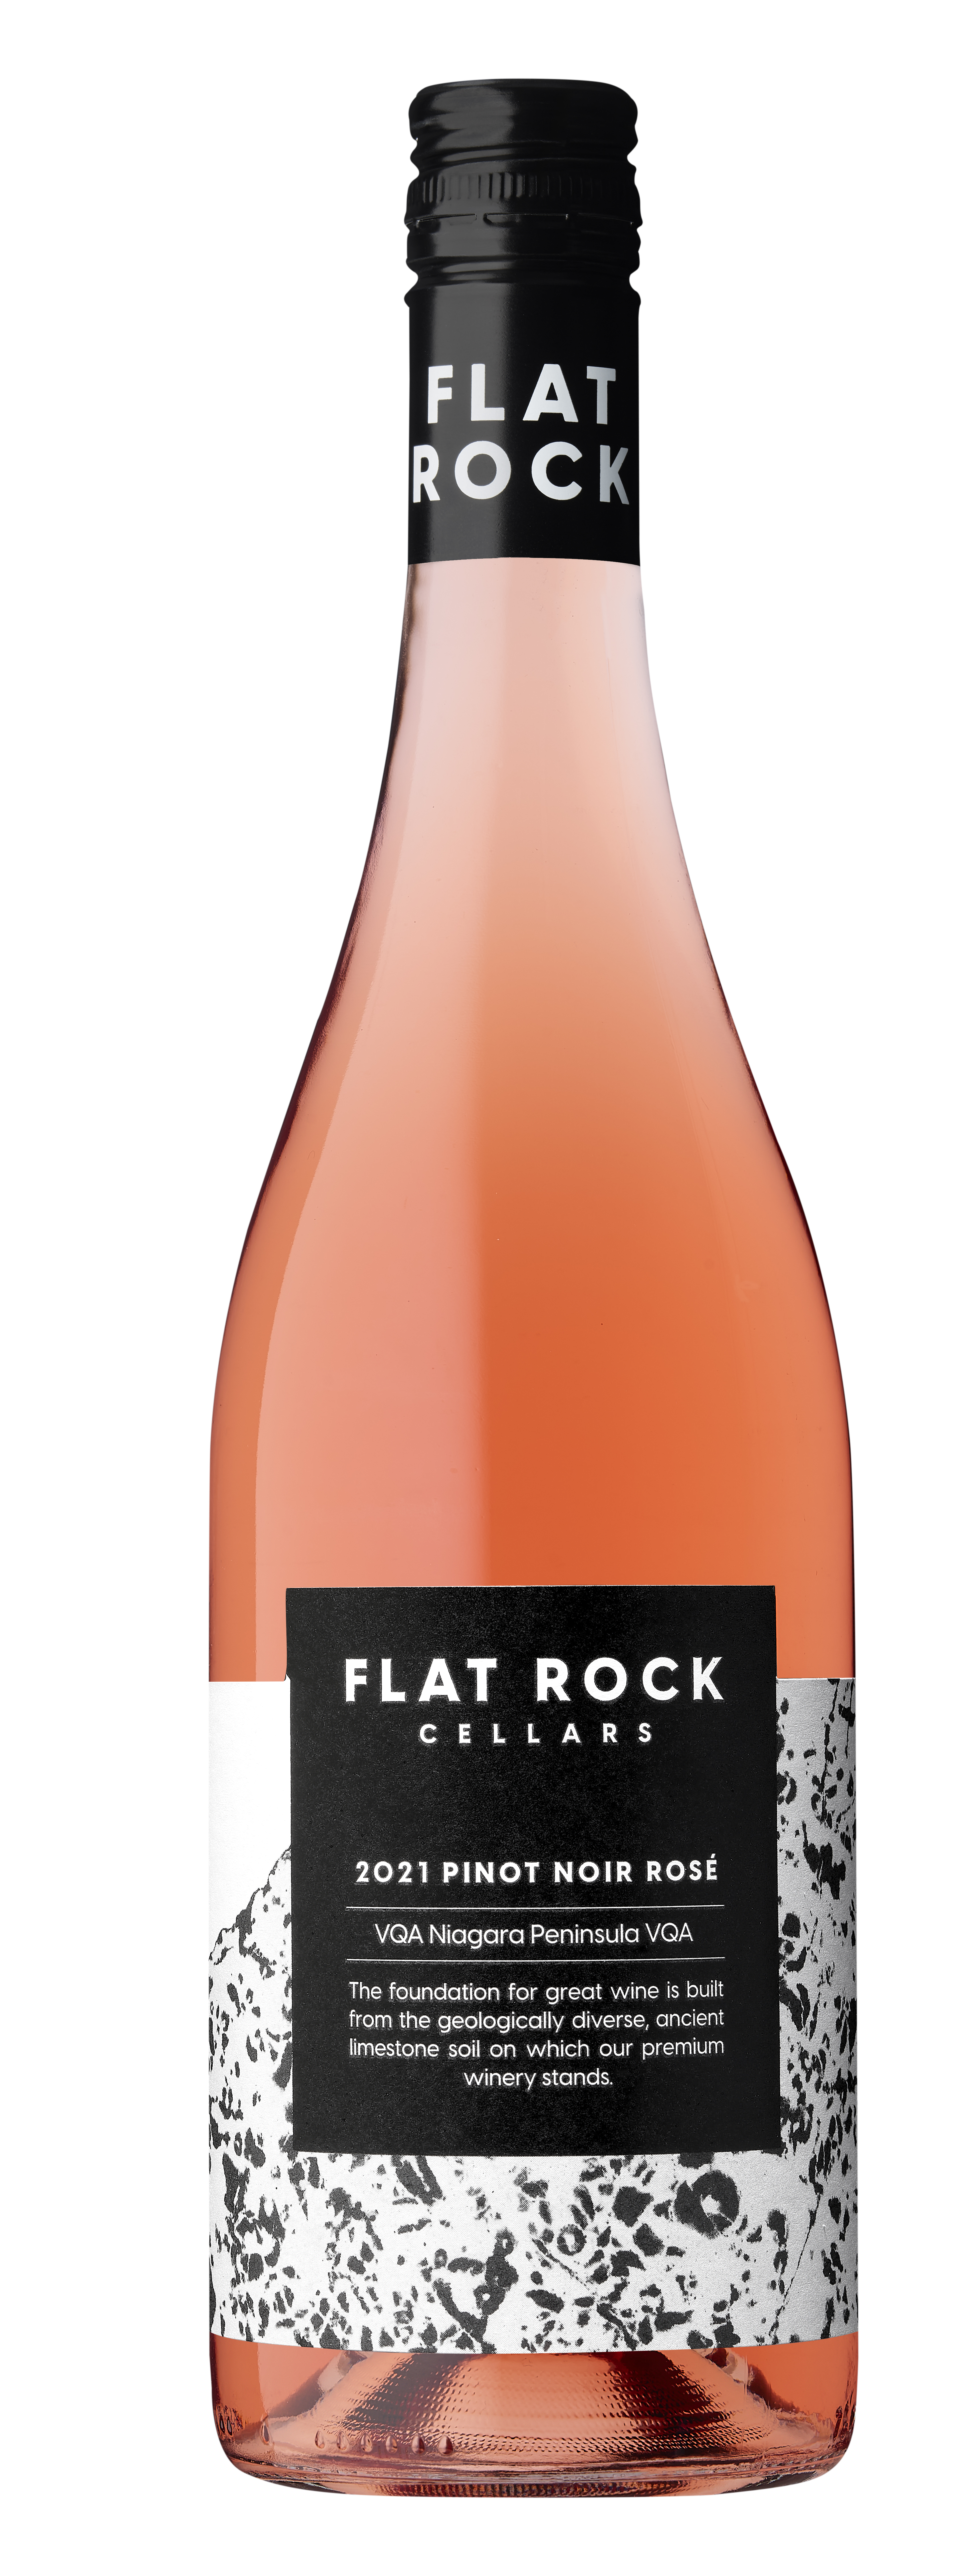 Product Image for 2021 Pinot Noir Rosé